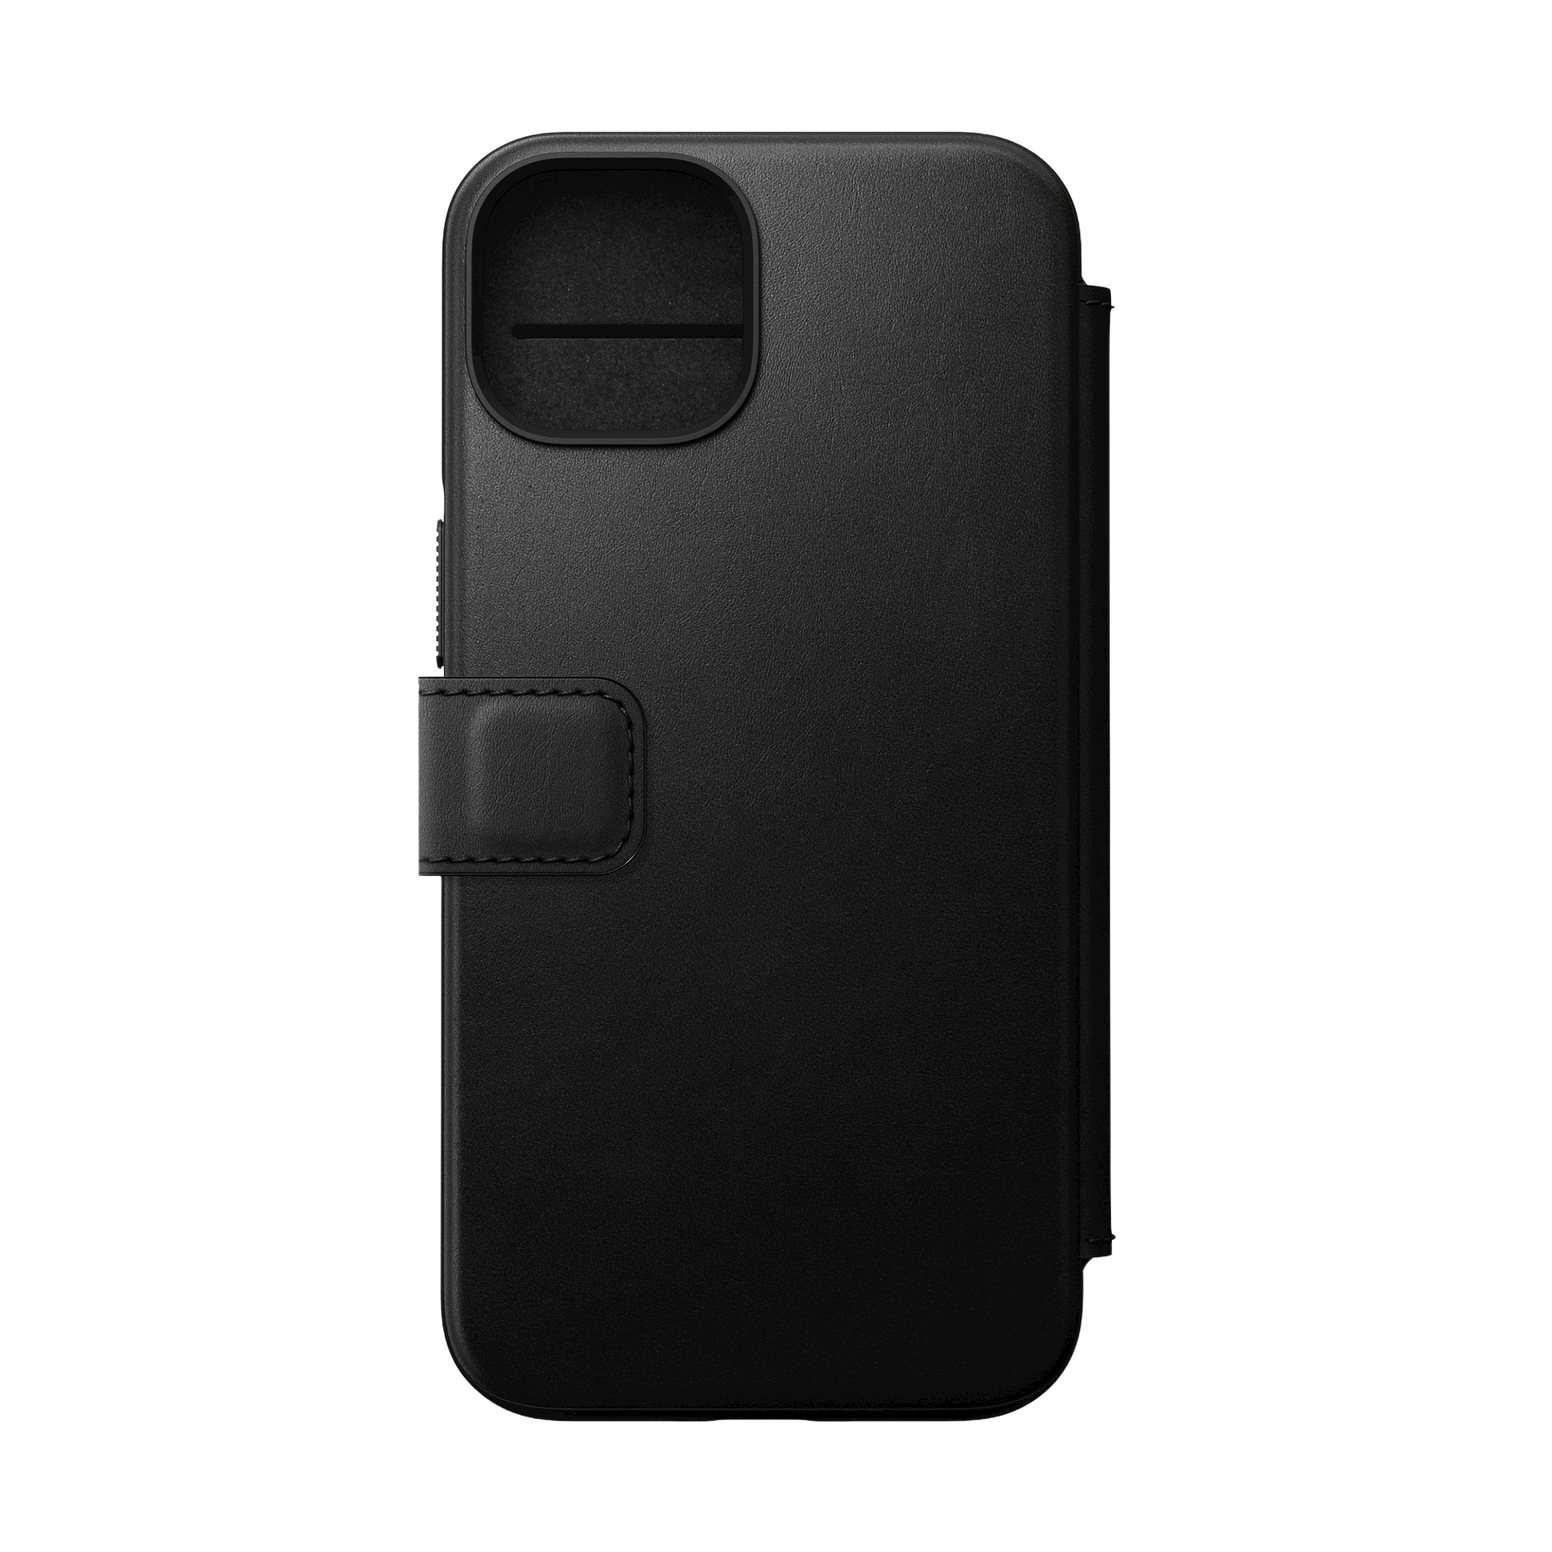 Nomad Modern Leather Folio for iPhone 14 - Black - Discontinued